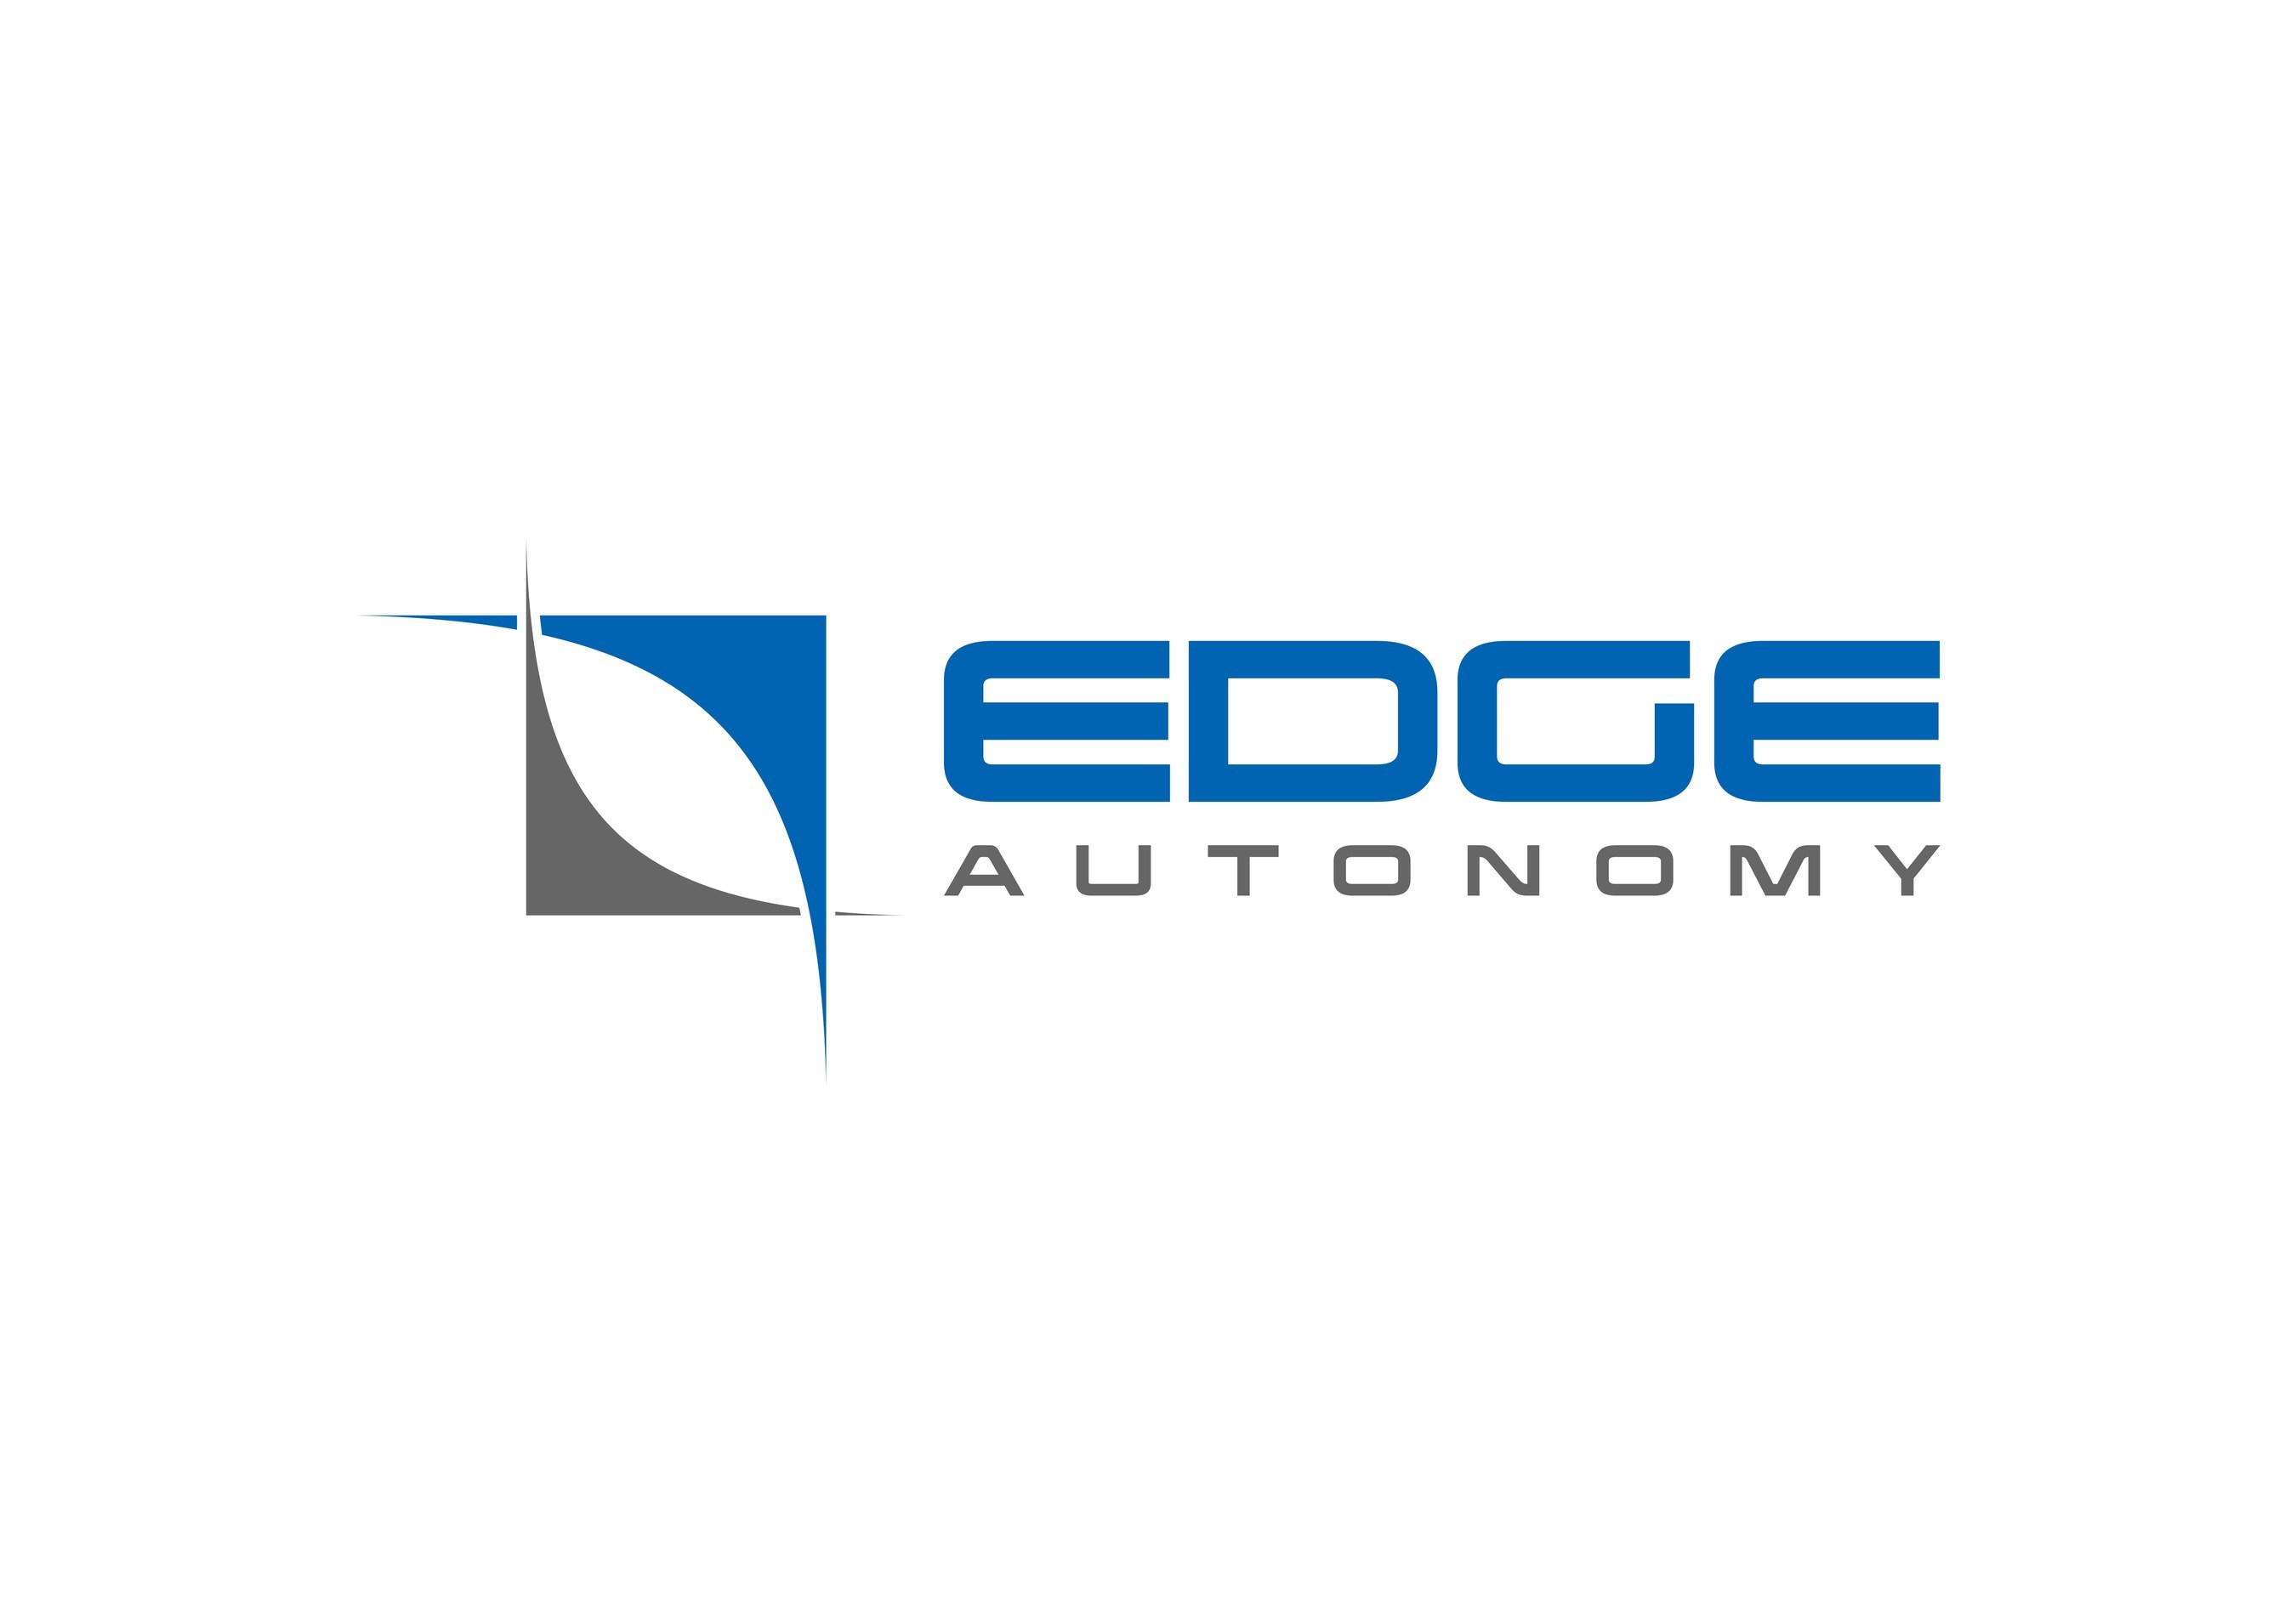 Edge Autonomy brings together two of the world’s leading small unmanned aerial vehicle platforms and camera payload manufacturers, UAV Factory and Jennings Aeronautics (JAI).. (PRNewsfoto/AE Industrial Partners,Edge Autonomy)